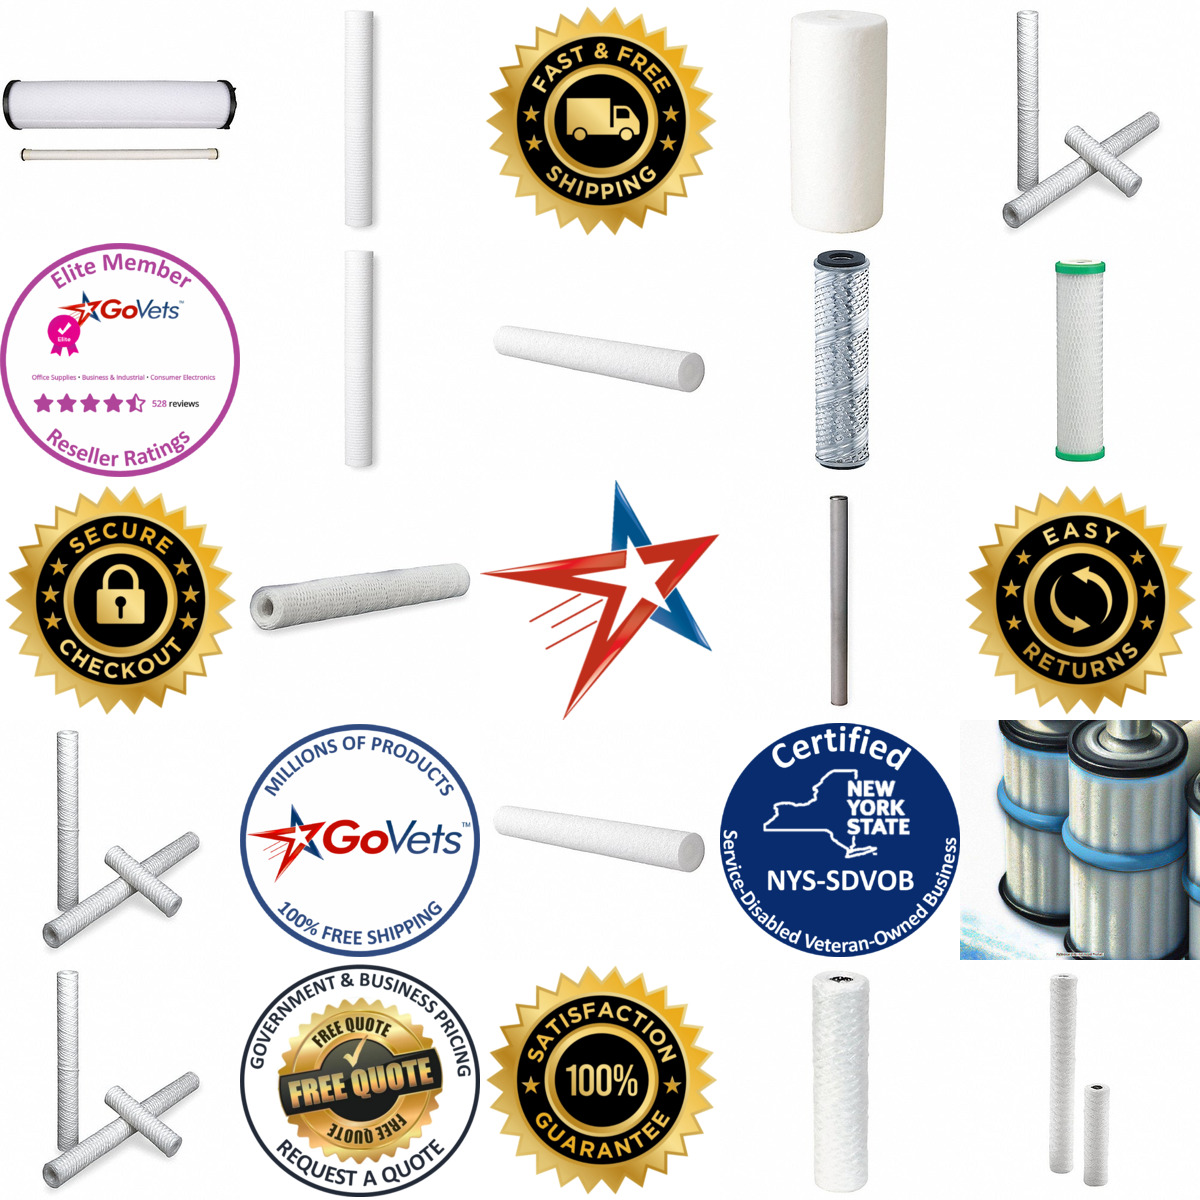 A selection of Filter Cartridges products on GoVets